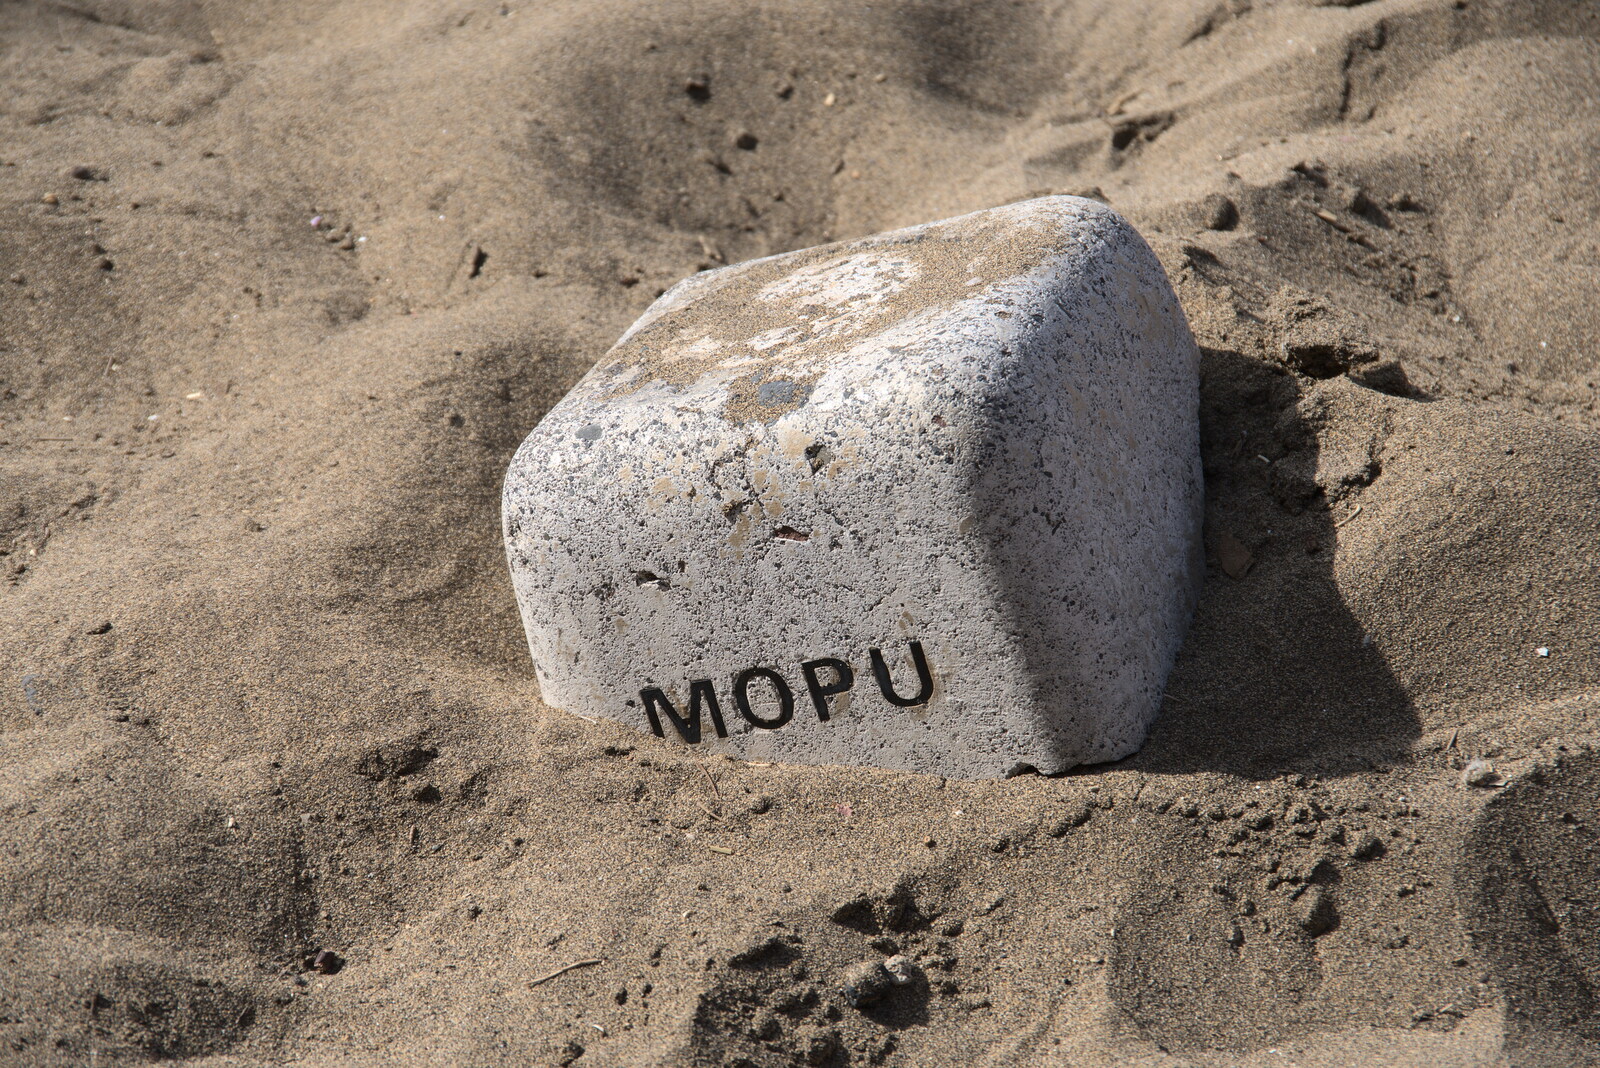 There's a rock with MOPU on it from Five Days in Lanzarote, Canary Islands, Spain - 24th October 2021